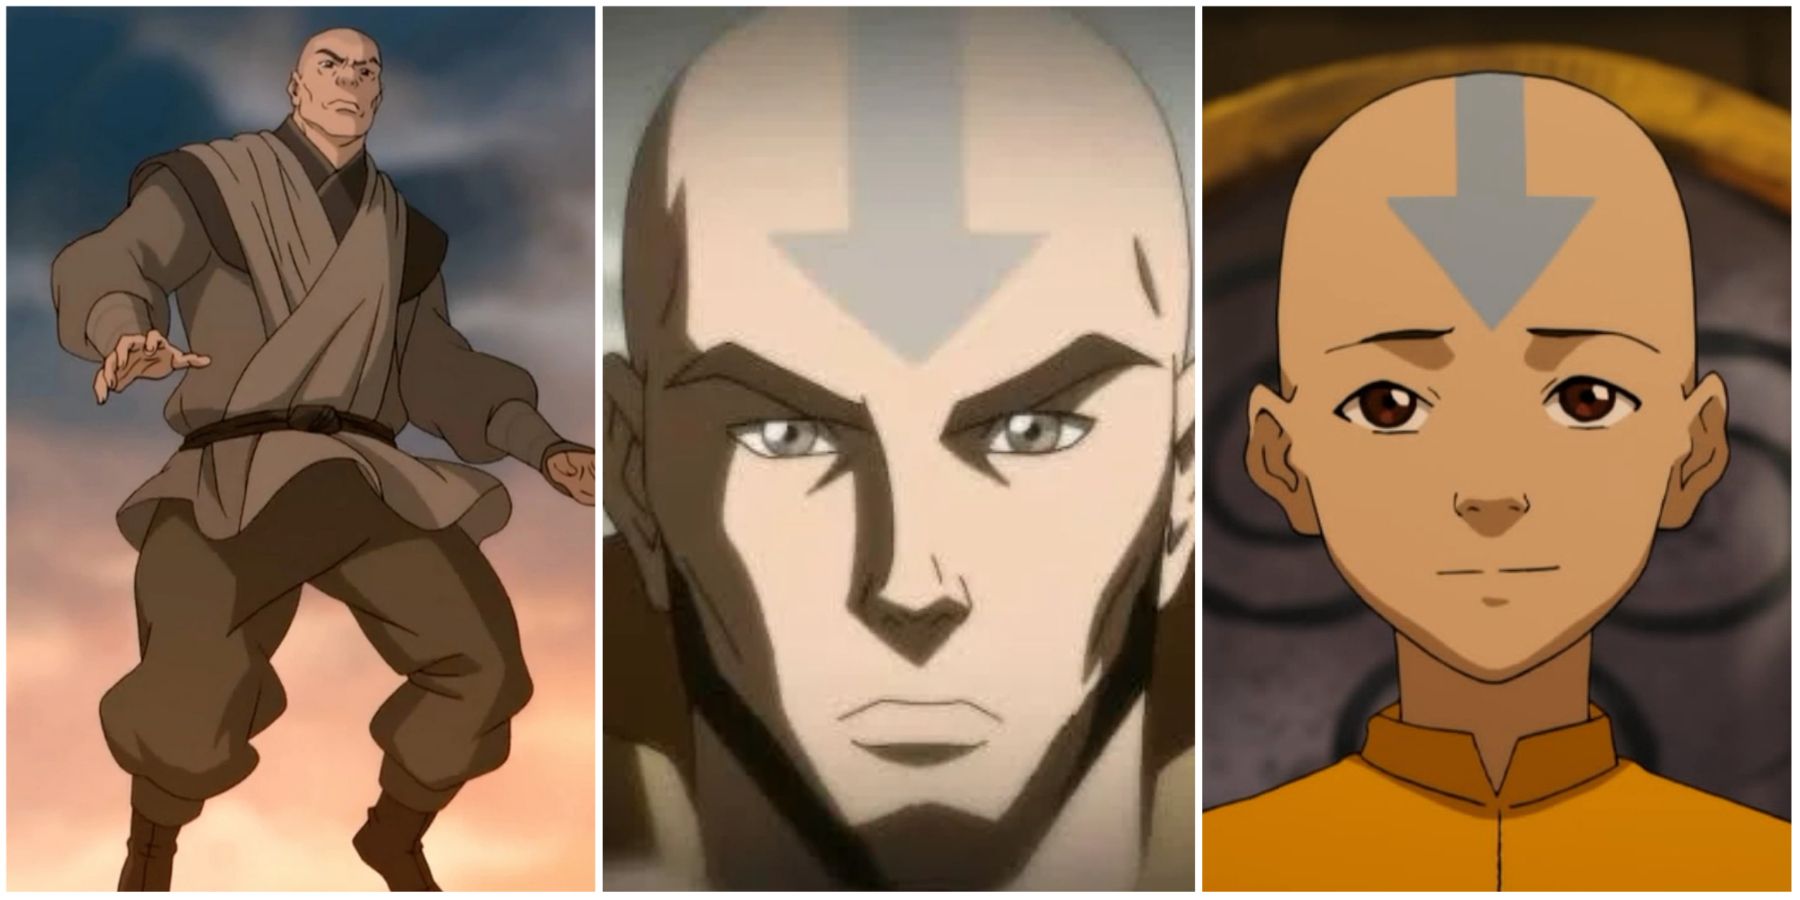 Some Of the Strongest Airbenders In The Avatar Franchise